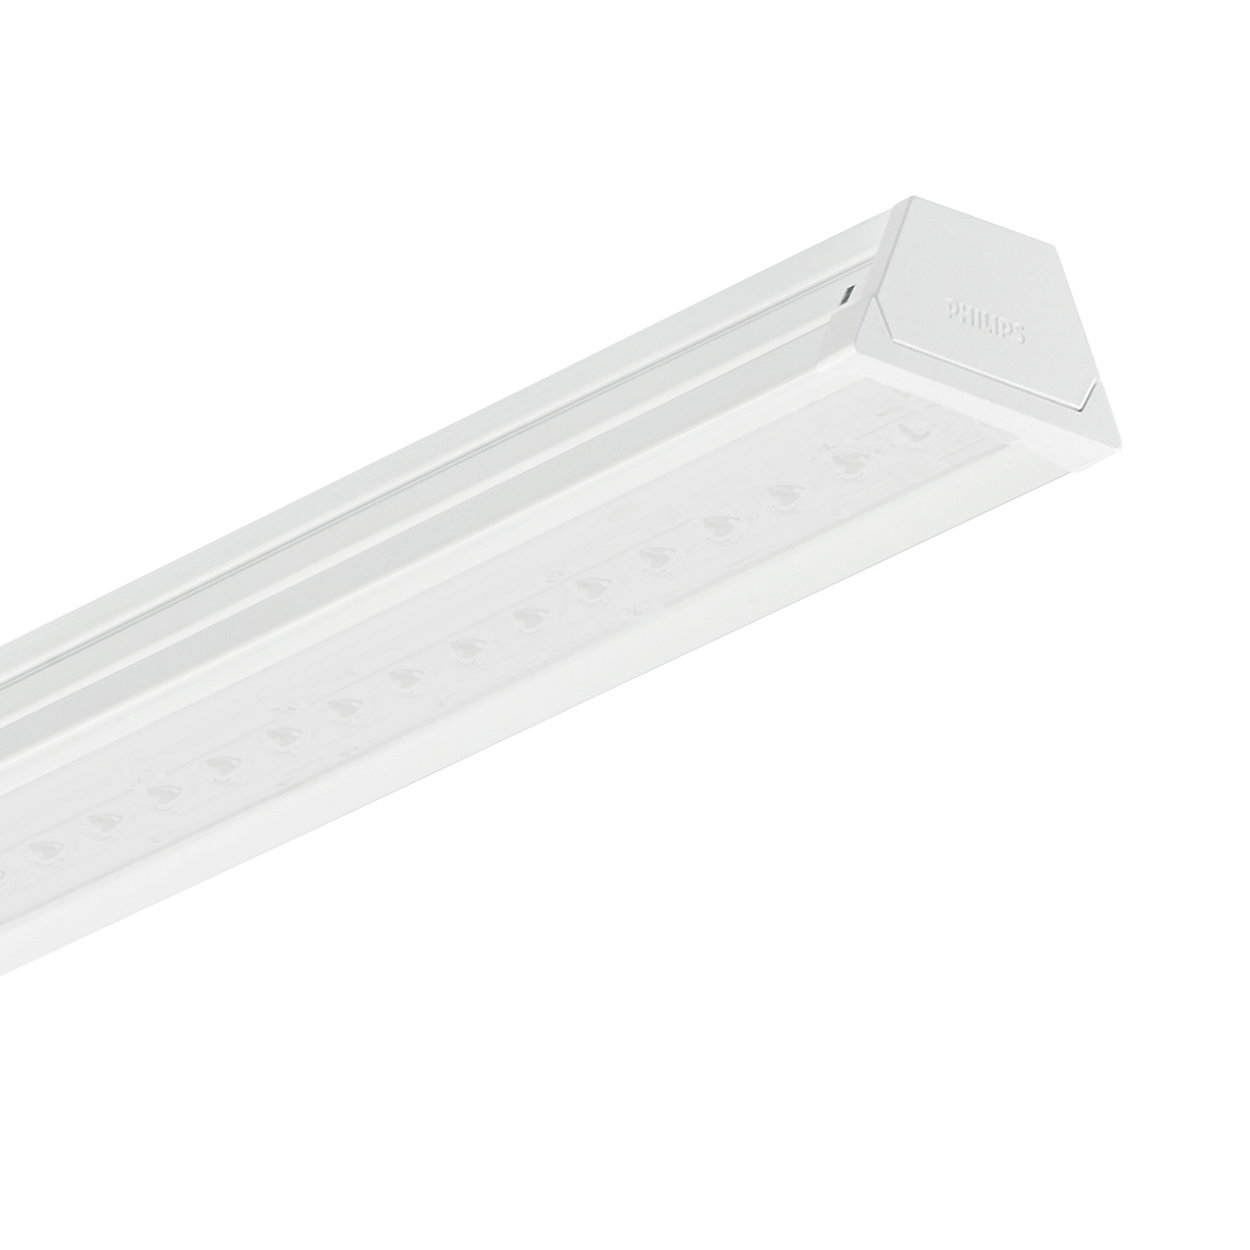 CoreLine Trunking – the clear choice for LED